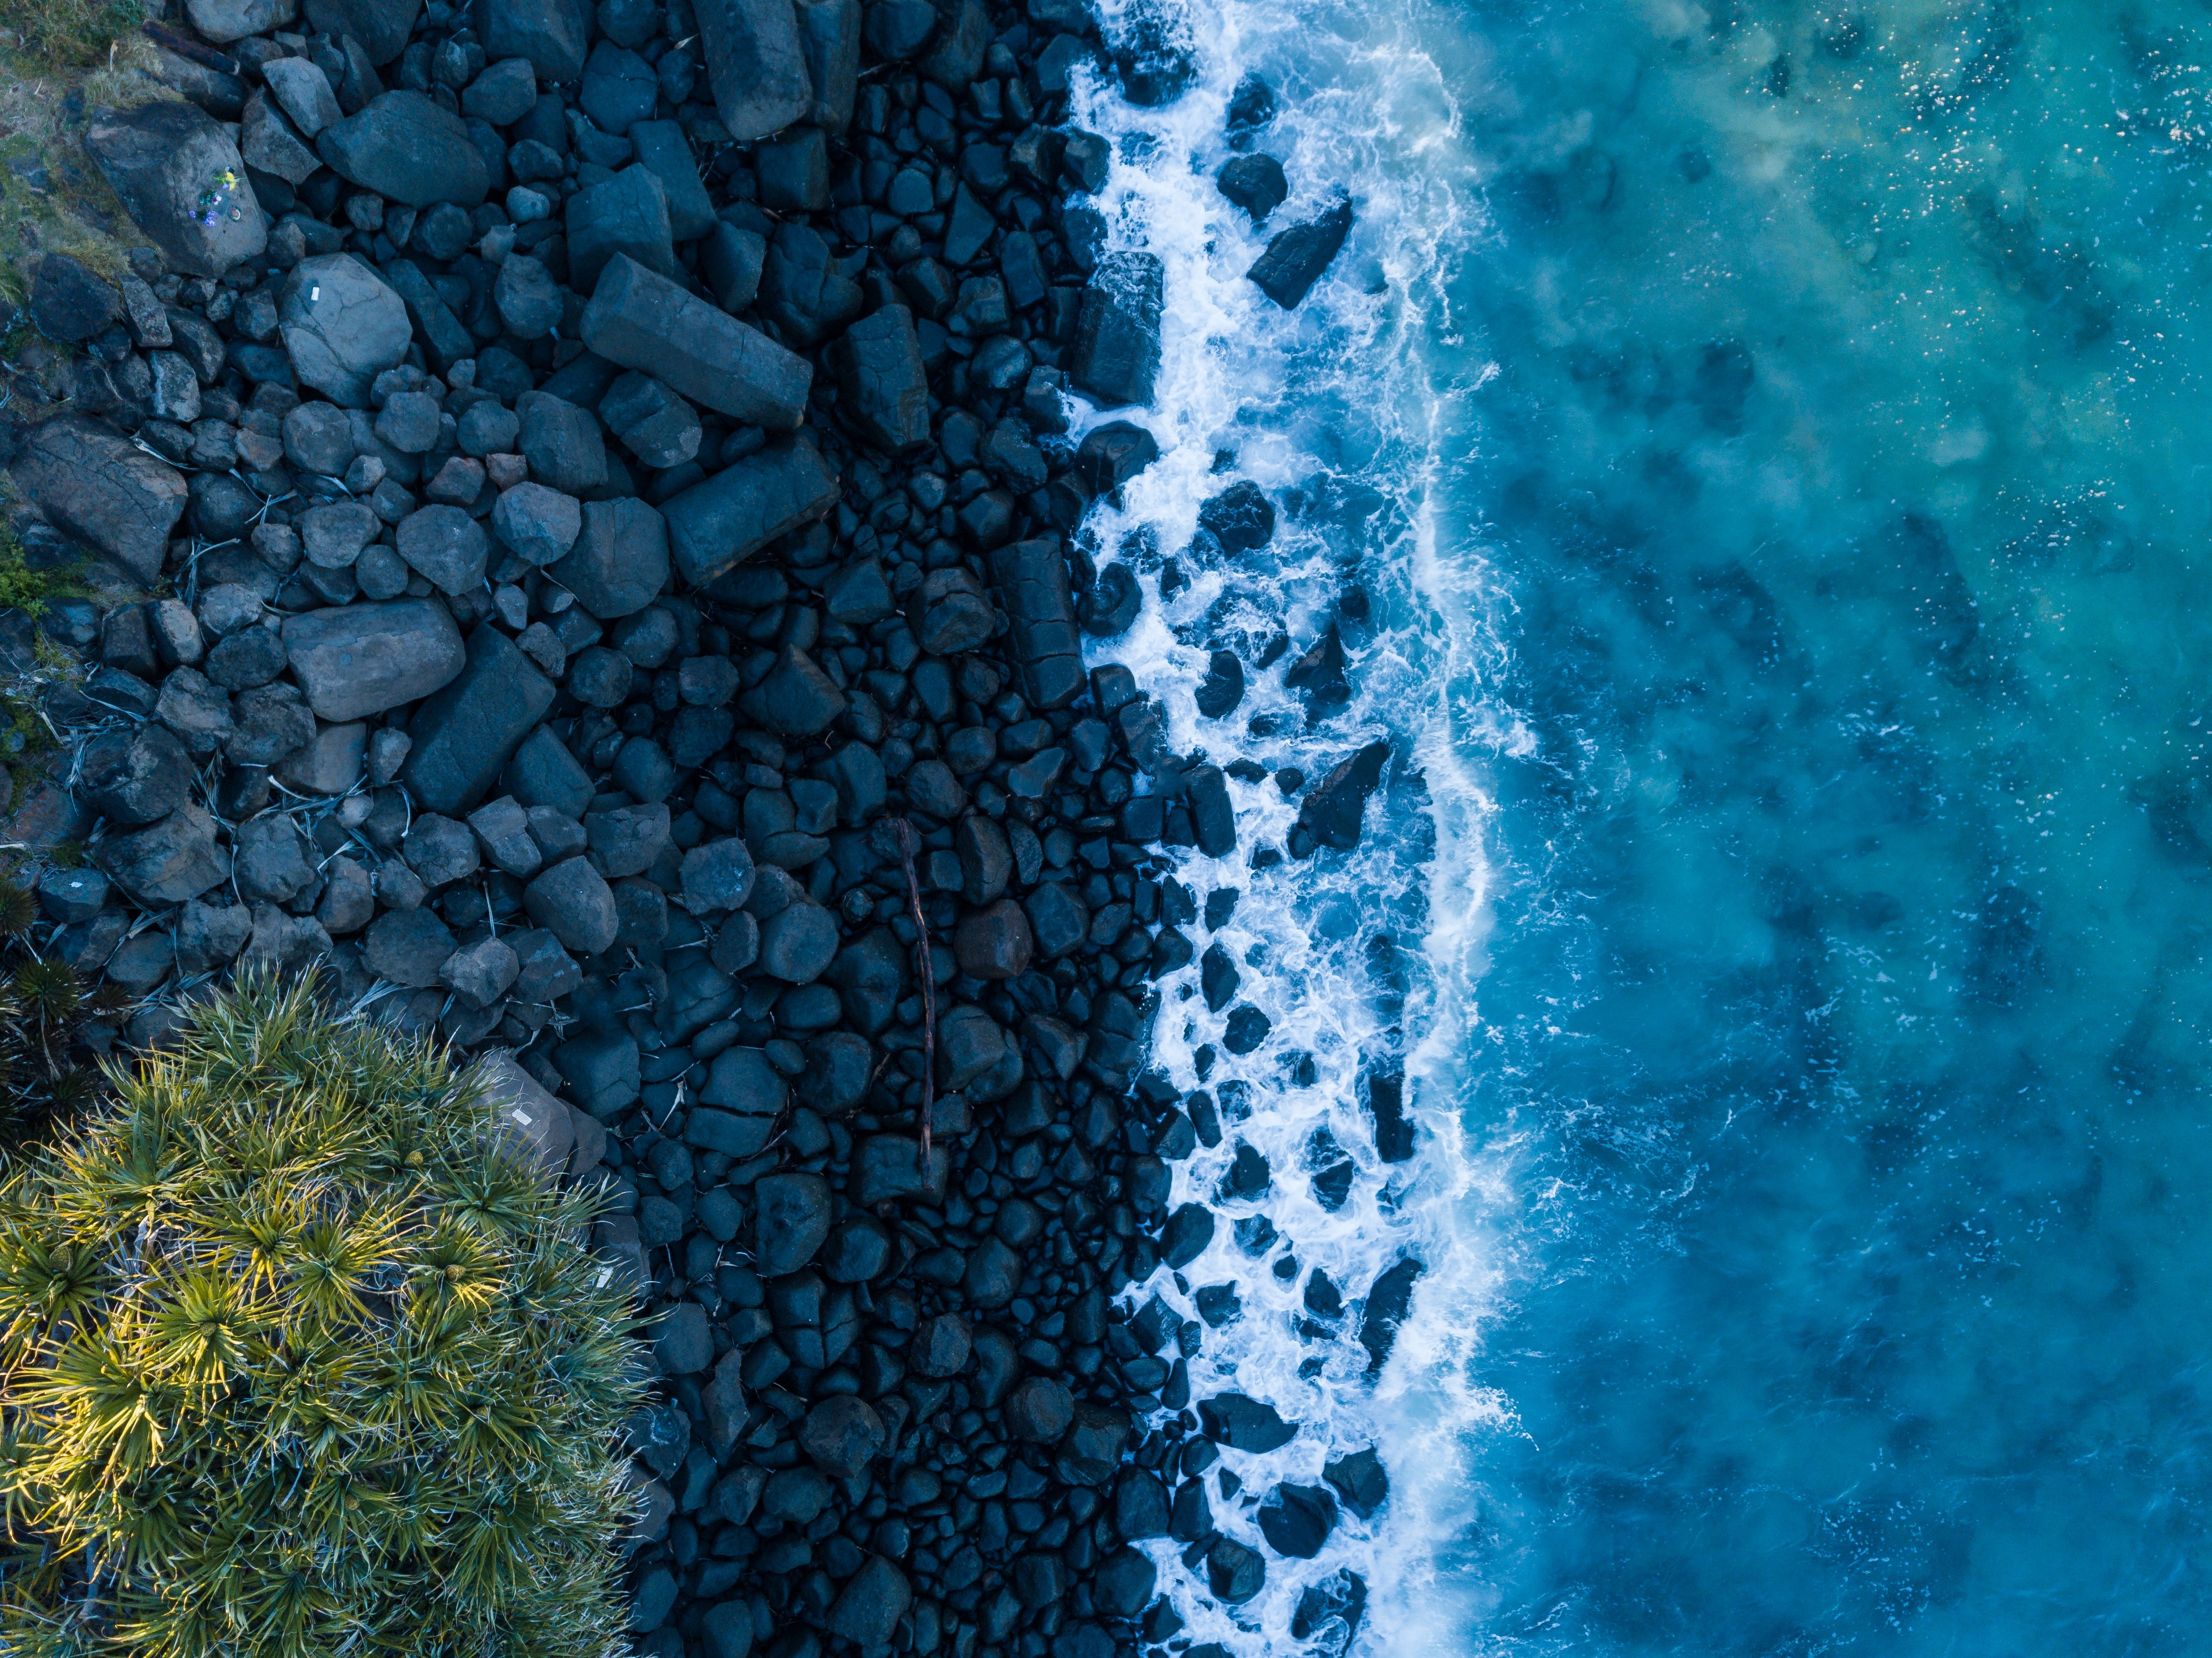 view from above, shore, ocean, bank, stones, surf, nature 2160p